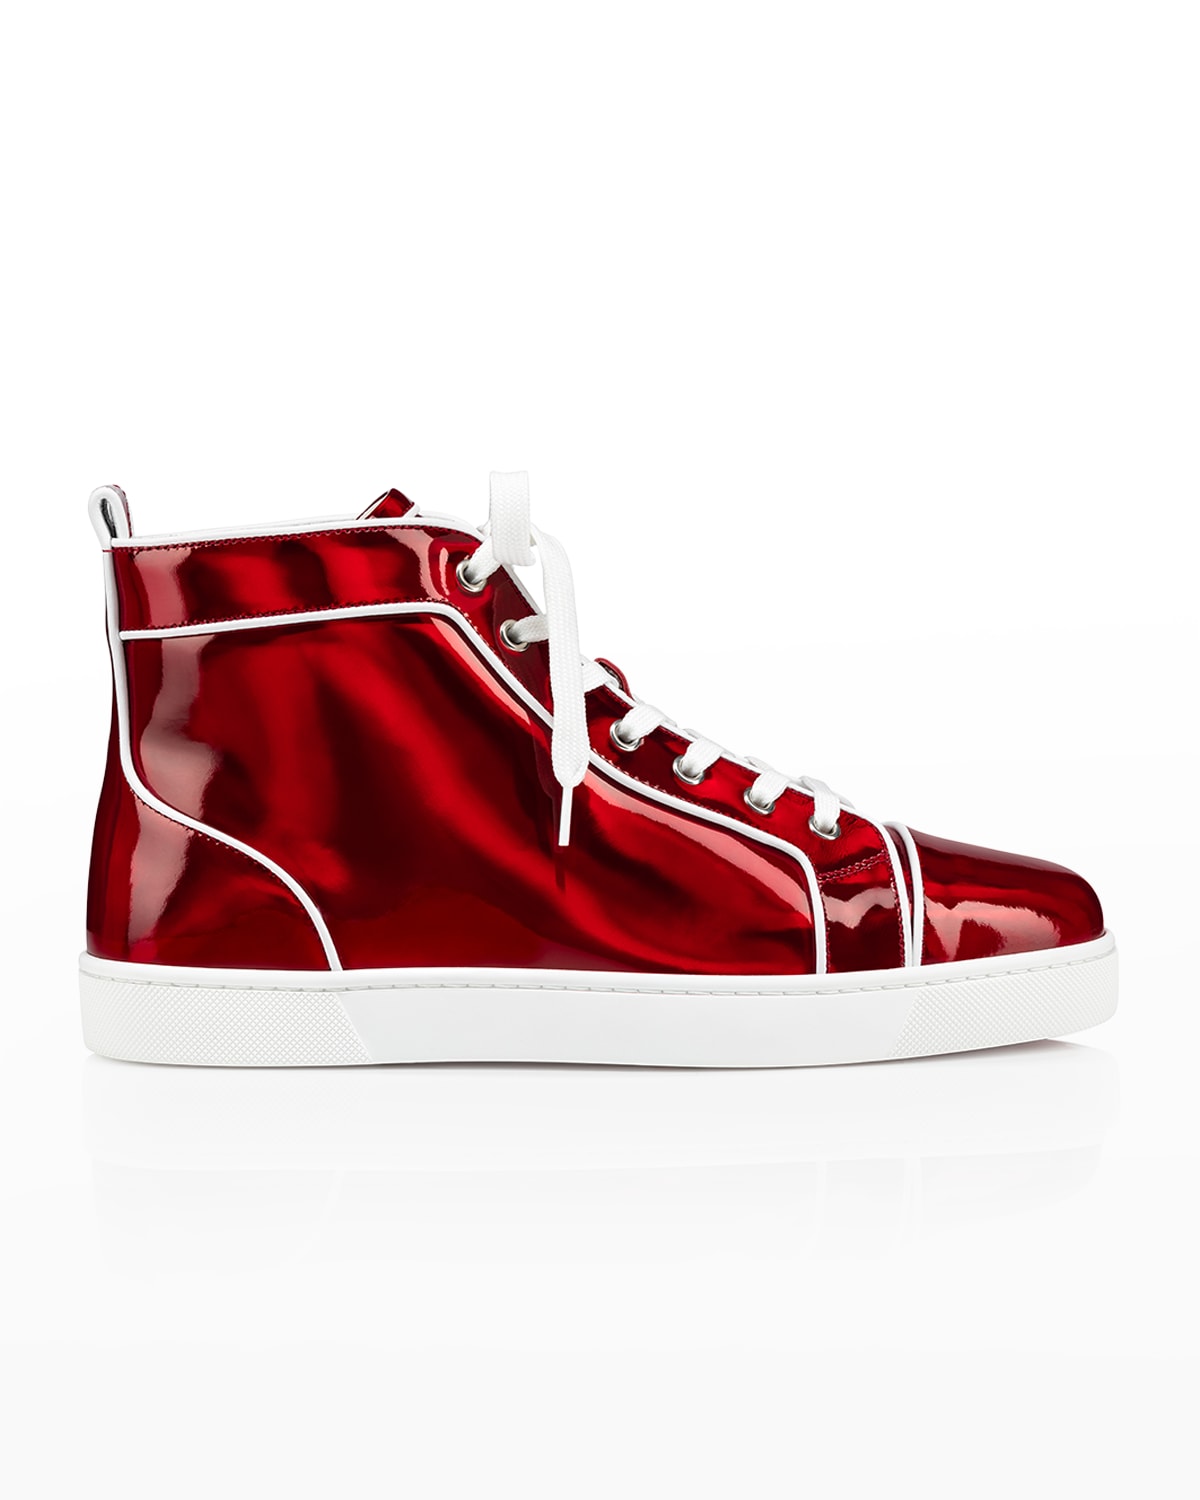 Men's Louis Orlato Red Sole High-Top Sneakers